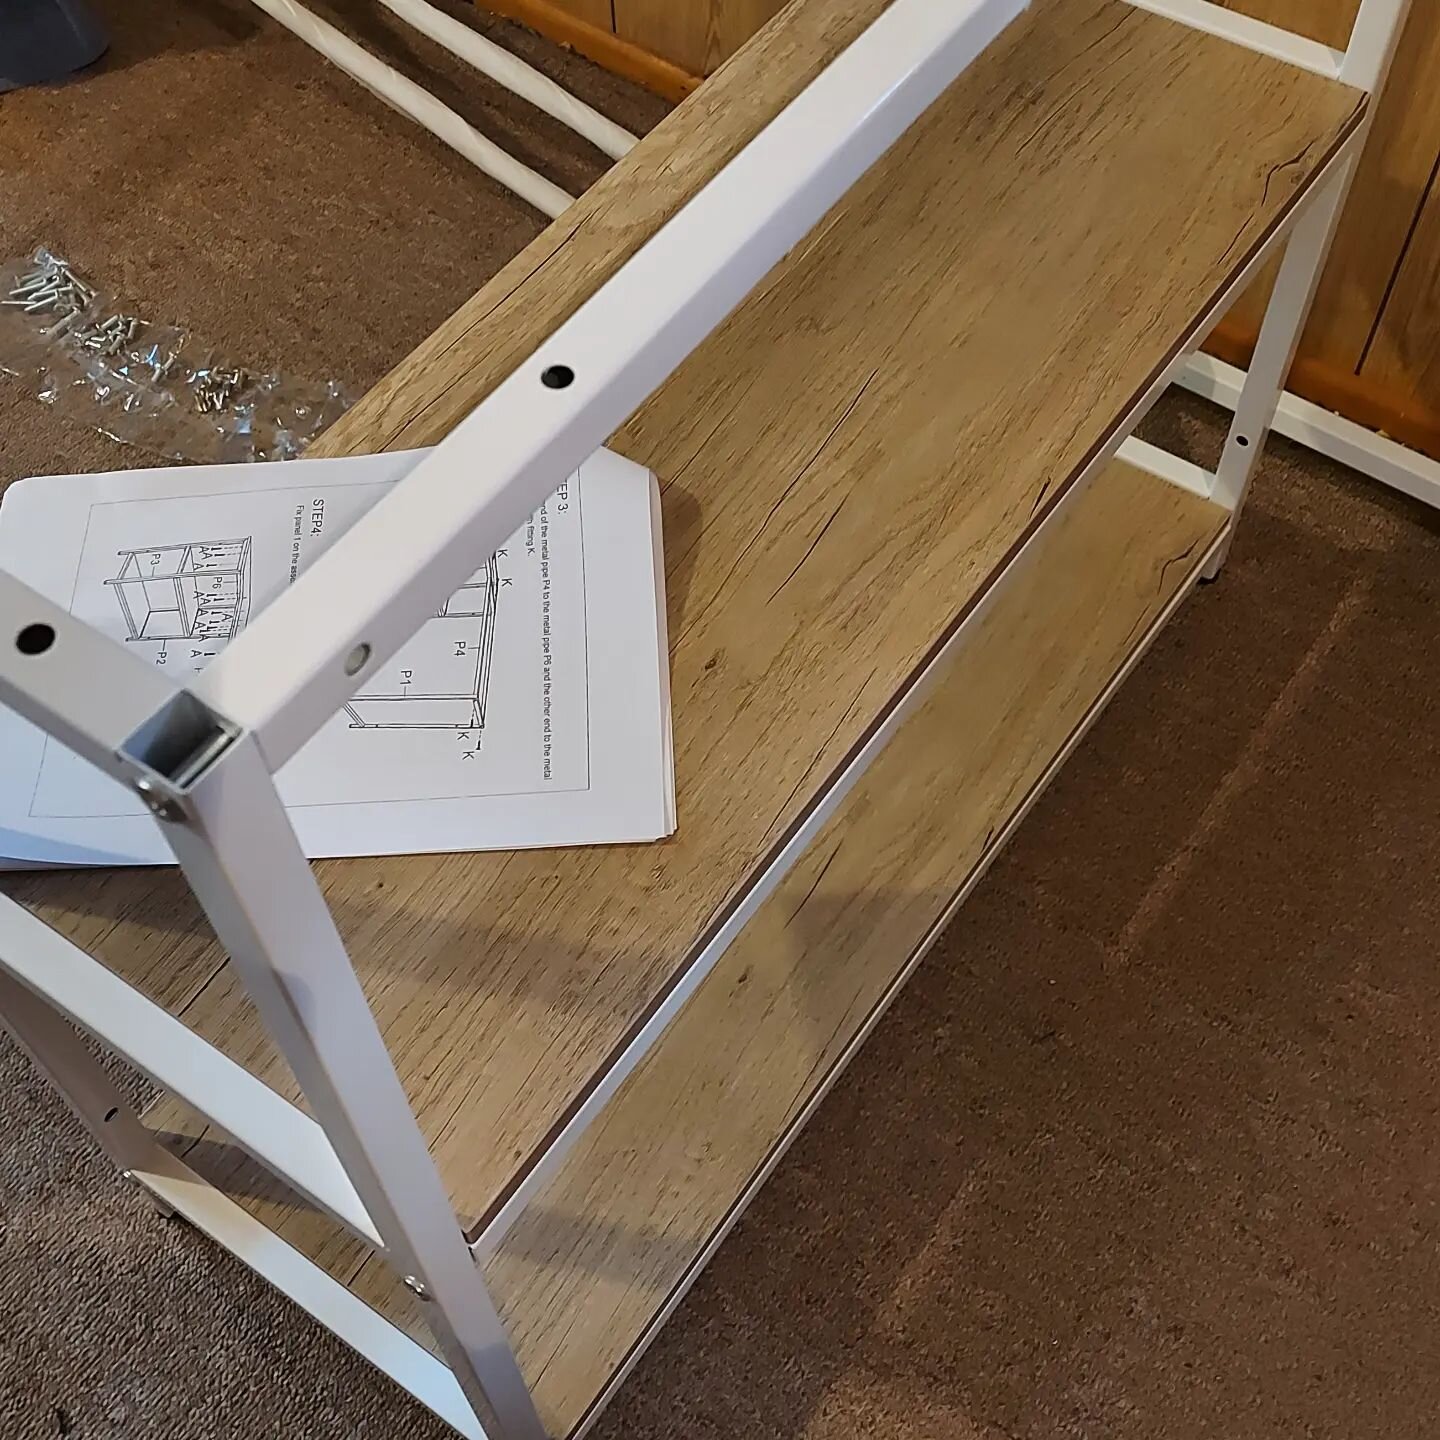 Today I took a break to frustrate myself . . . I mean, put together a flat pack desk. It was a good example of how terrible instructions make everything take longer!